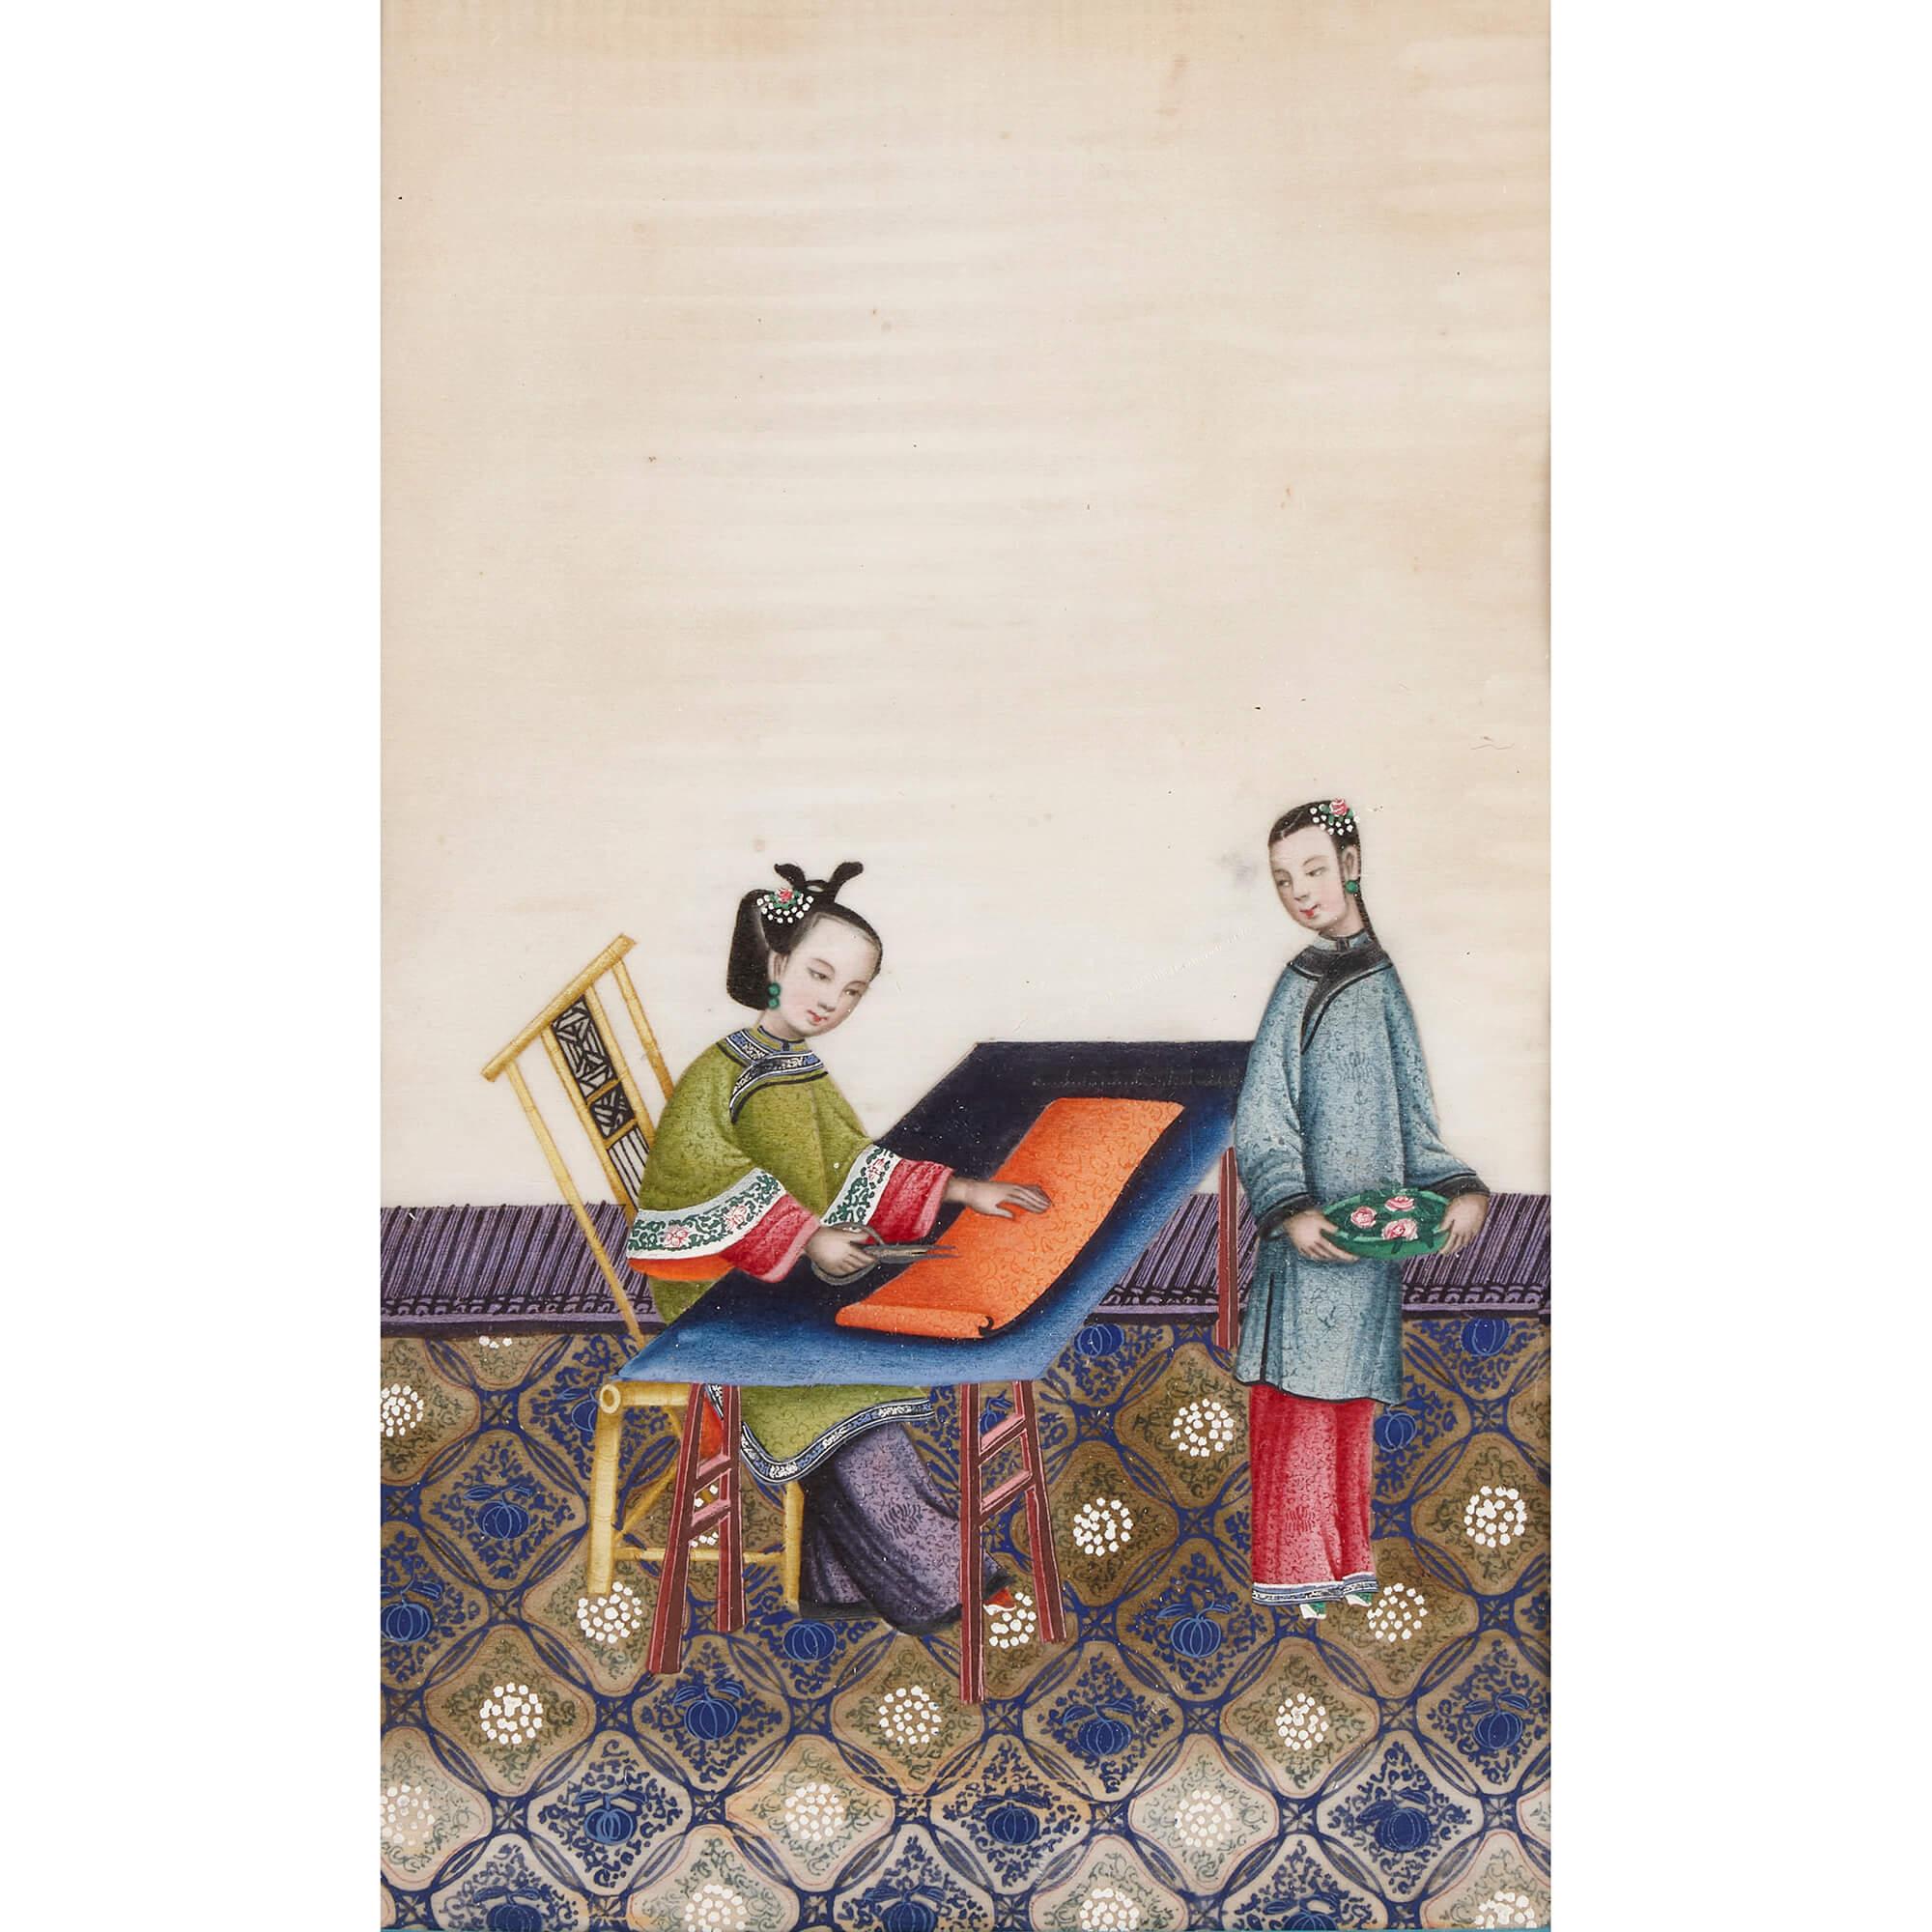 Antique set of six Chinese paintings depicting weaving 
Chinese, 19th Century 
Panel: Height 32cm, width 21cm
Frame: Height 47.5cm, width 36cm, depth 1.5cm

This set of Chinese pith paintings depicts six vignettes of women weaving. The bright